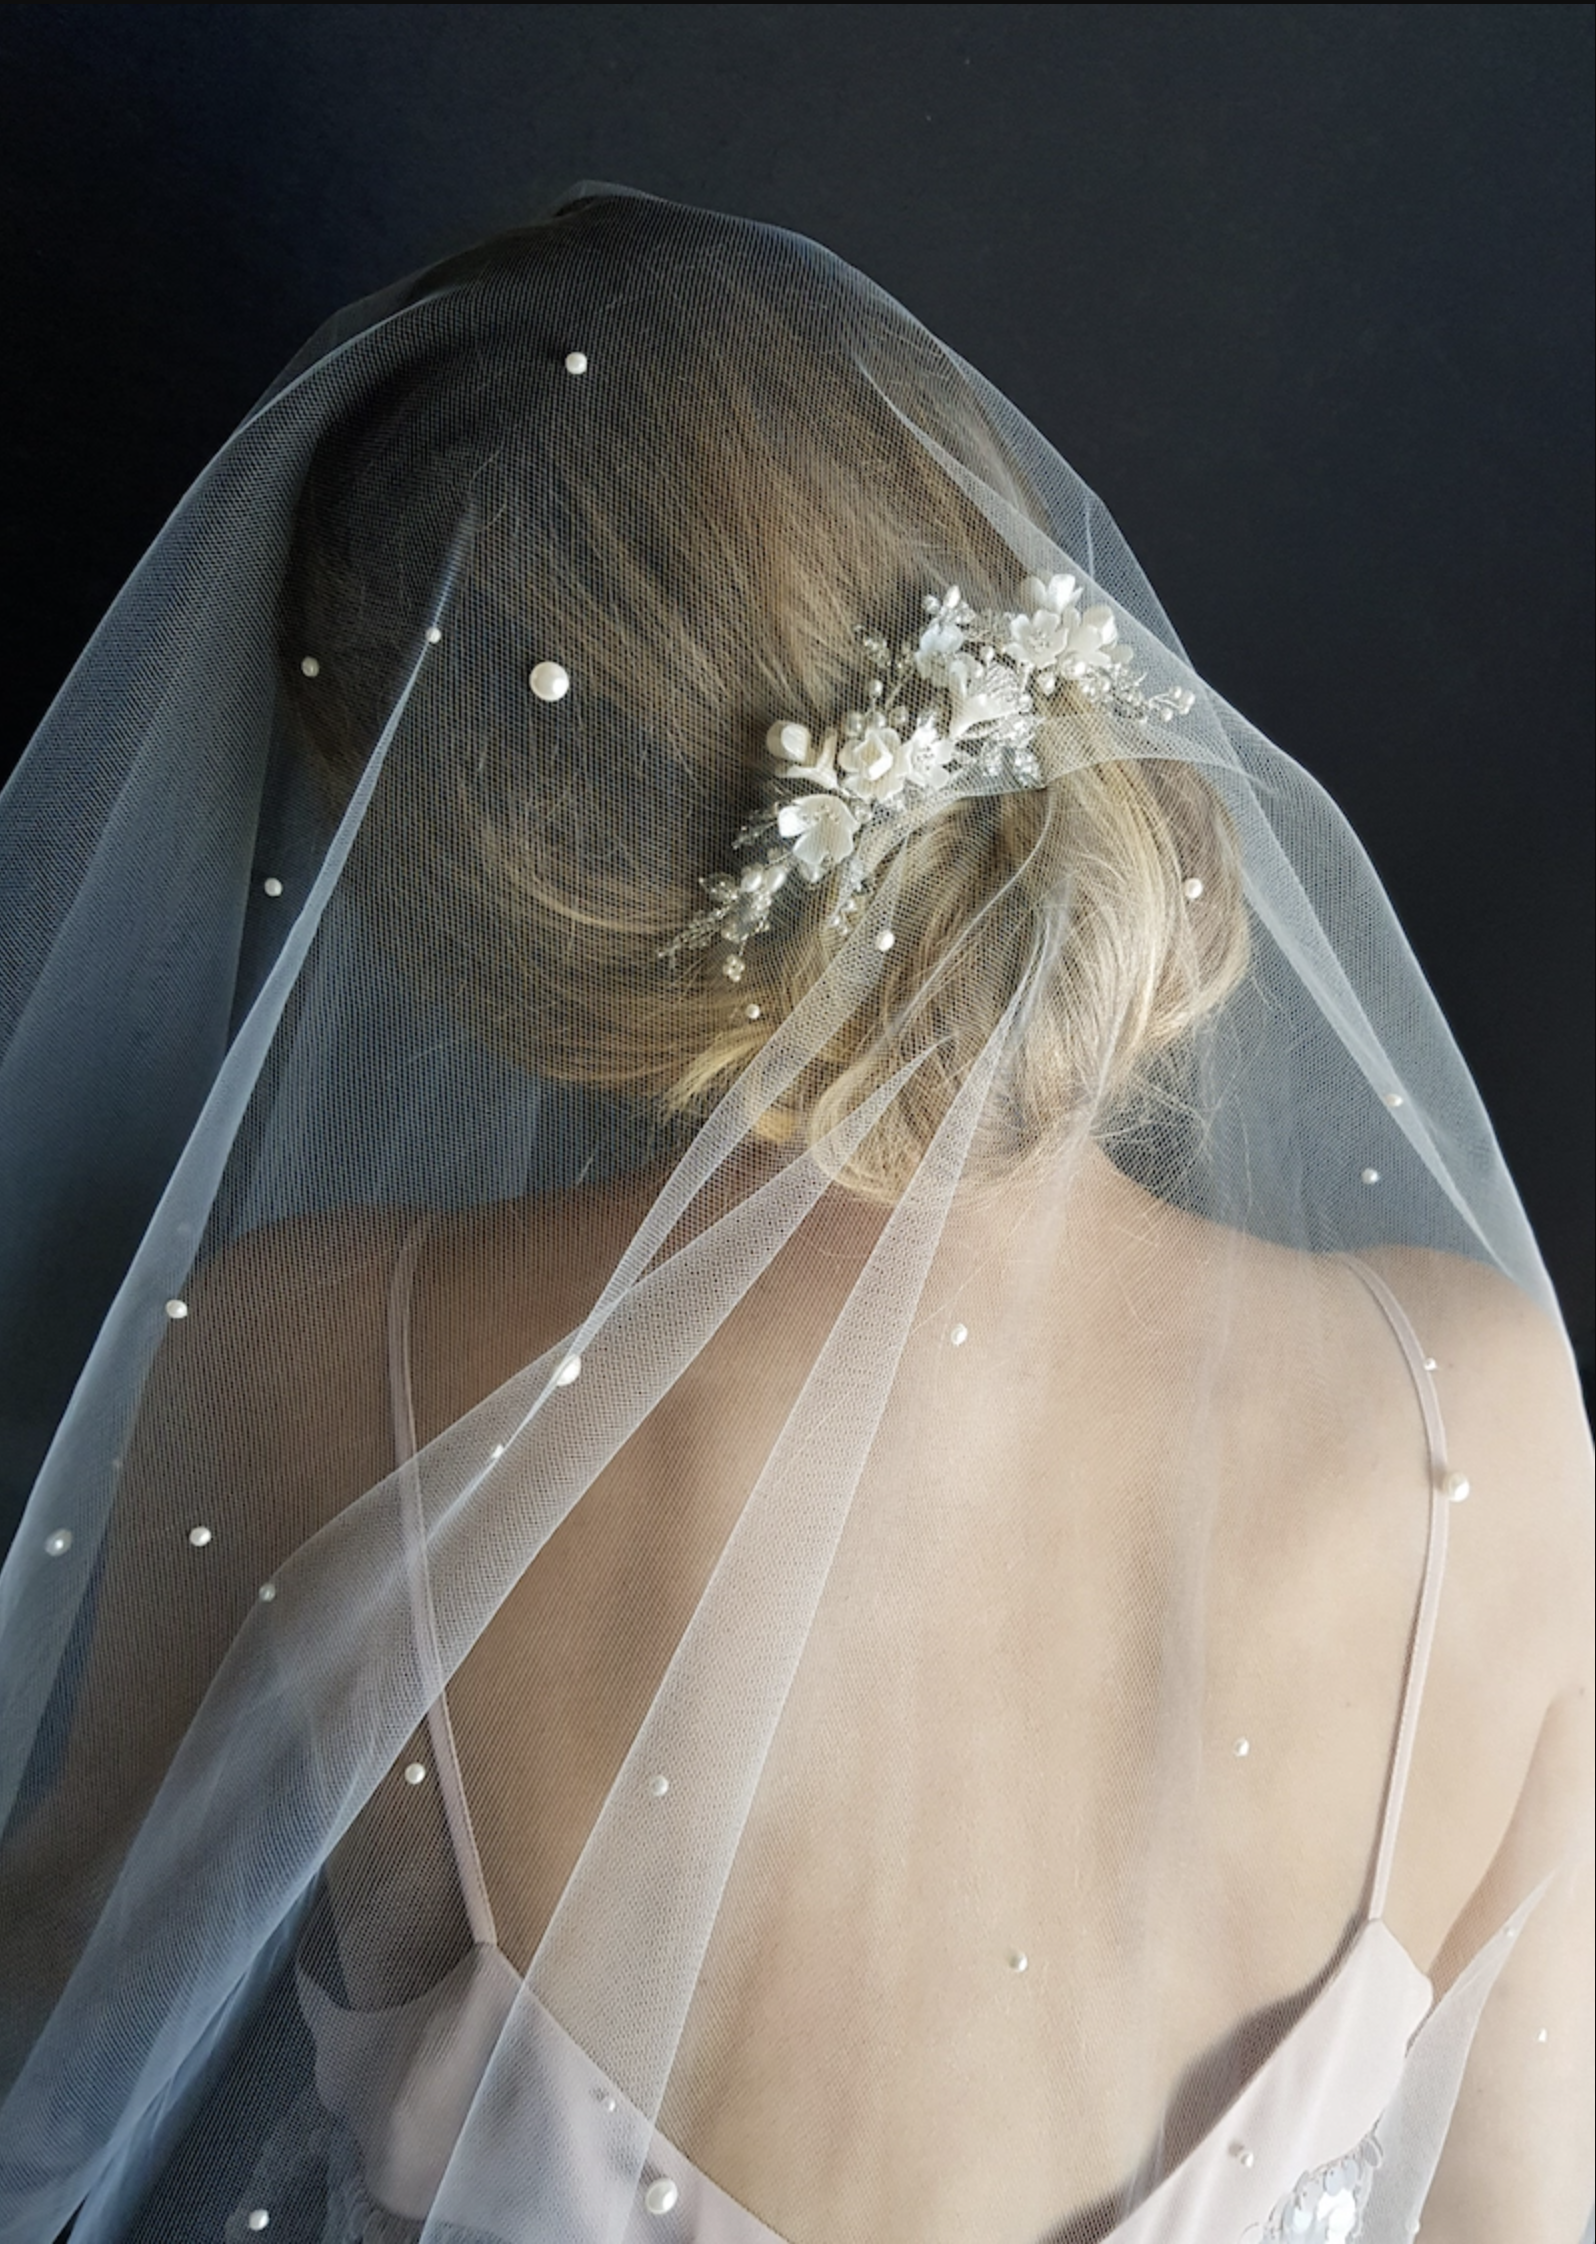 6 Things to Remember When Choosing a Wedding Veil